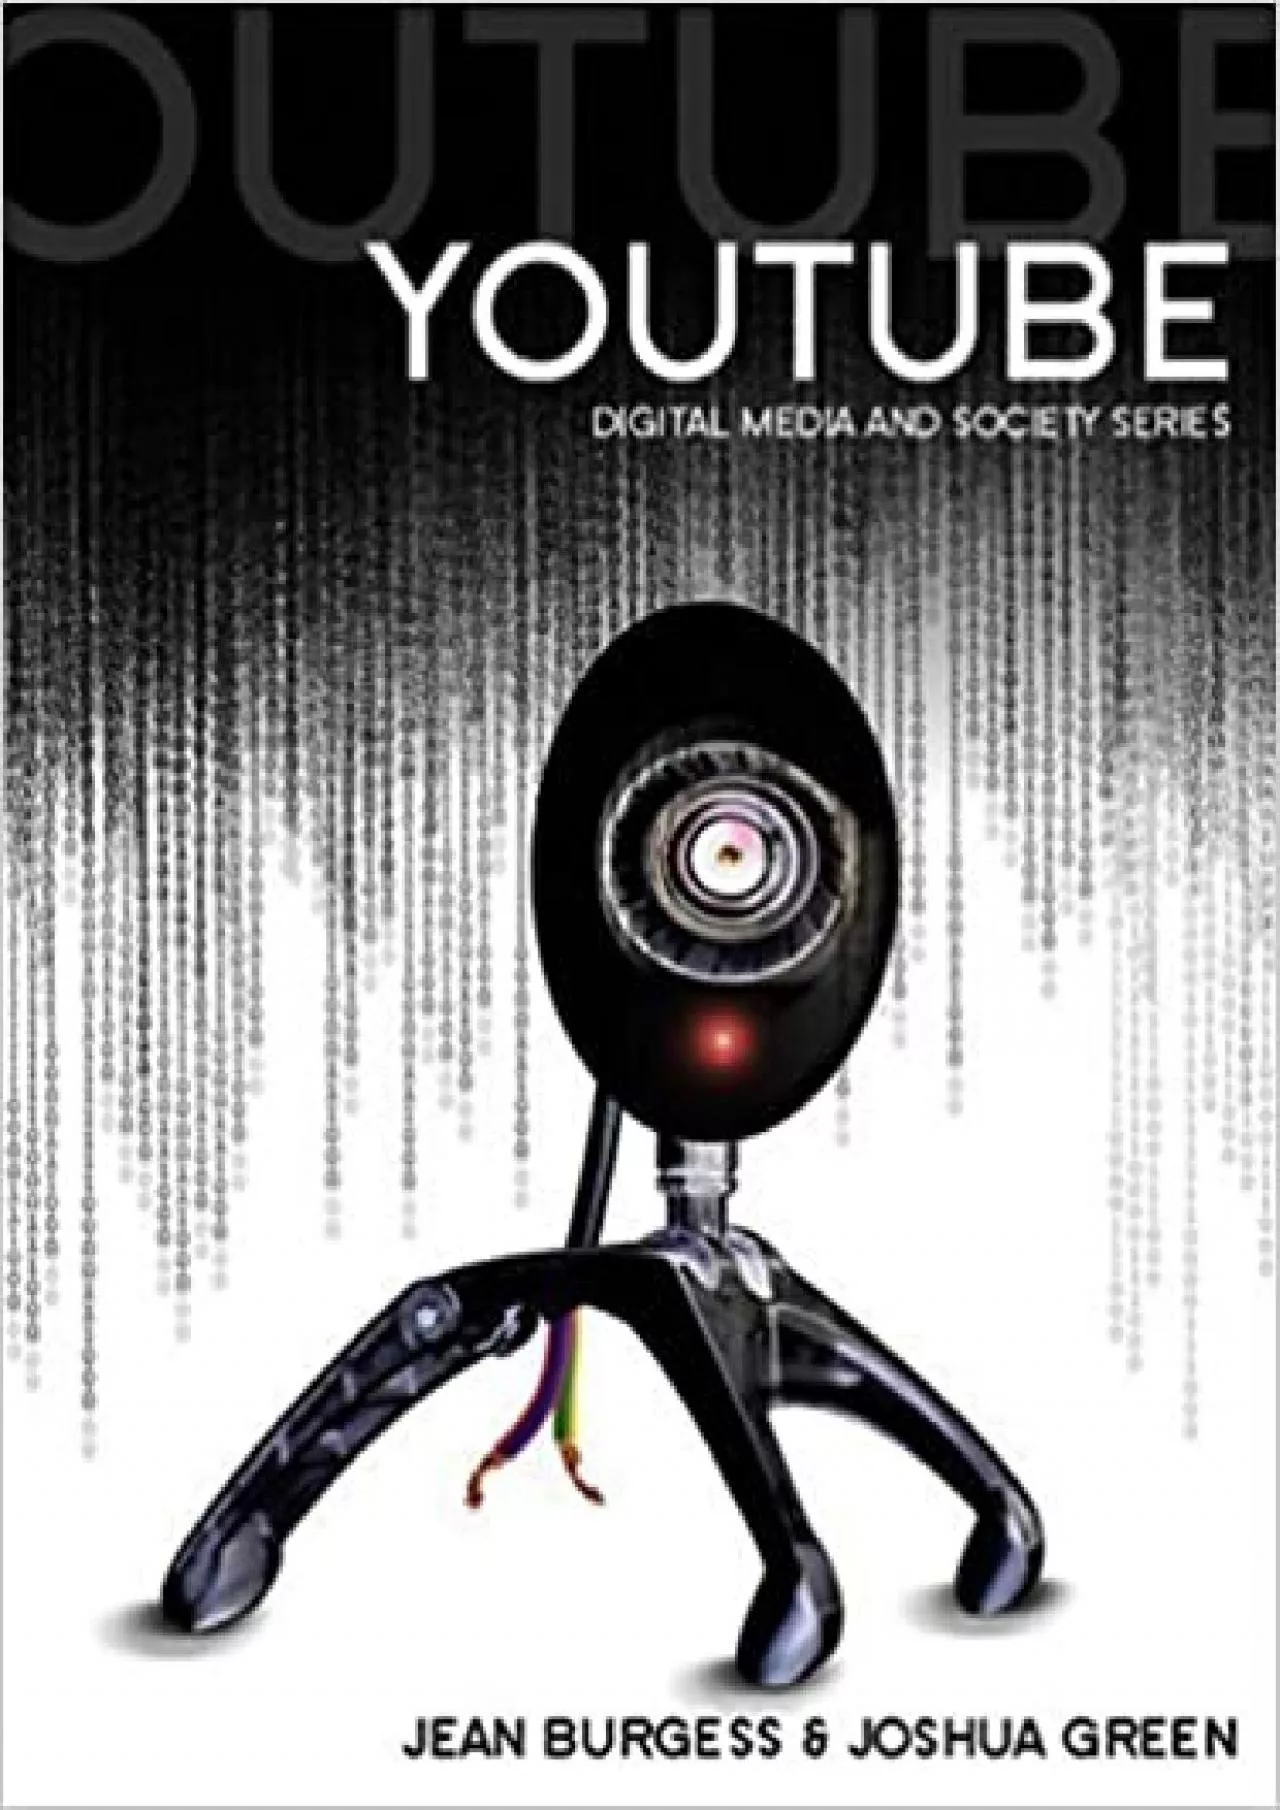 (DOWNLOAD)-YouTube Online Video and Participatory Culture (DMS - Digital Media and Society)